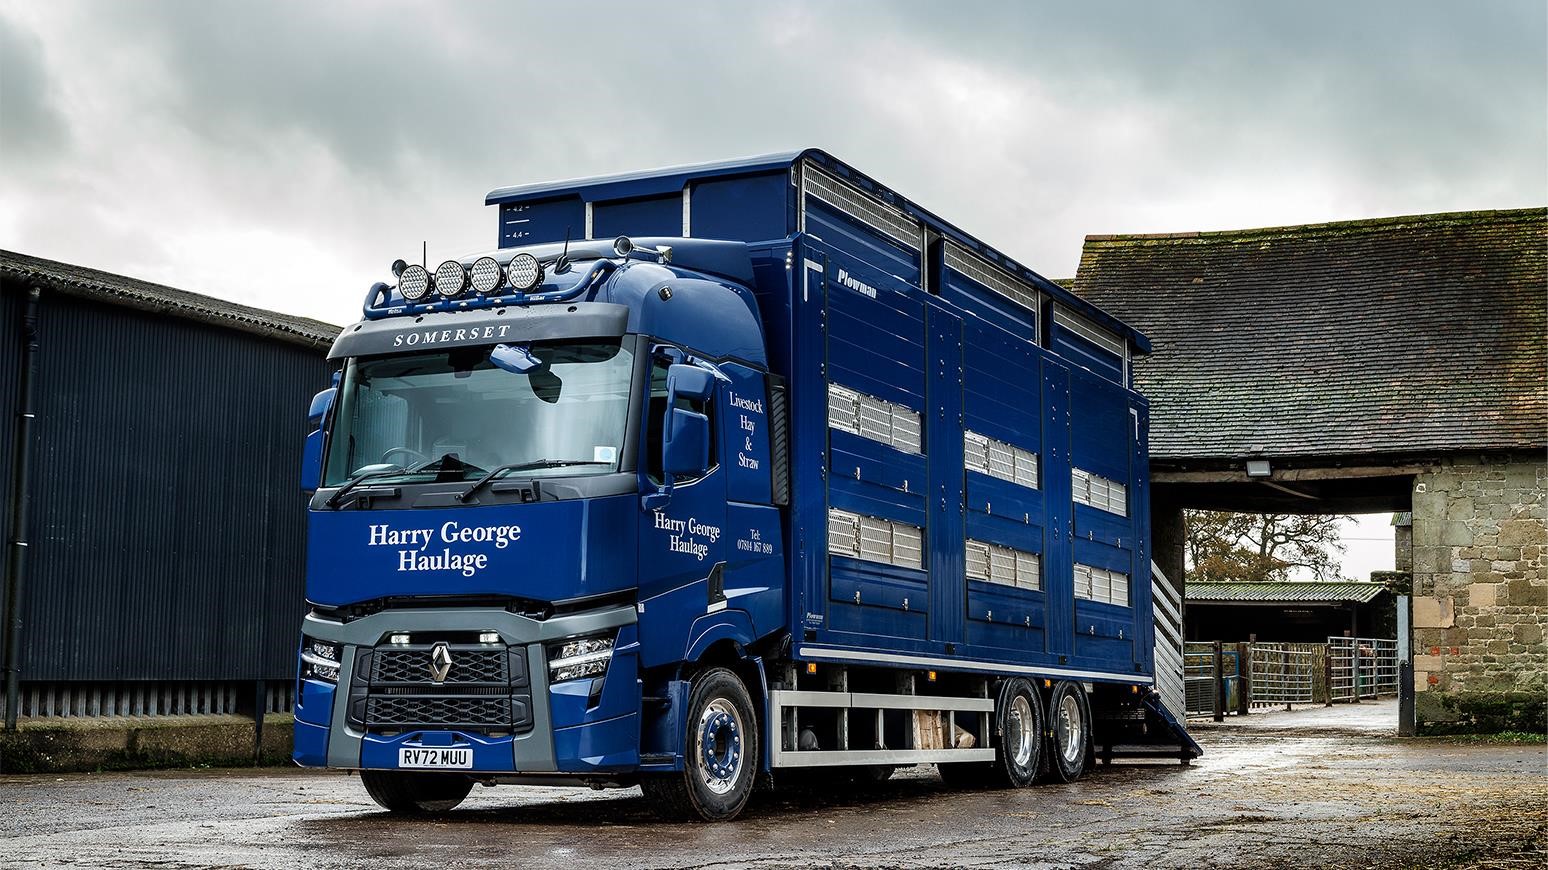 Harry George Haulage Turns To Renault Trucks Once Again, Acquires New T520 6x2 Rigid